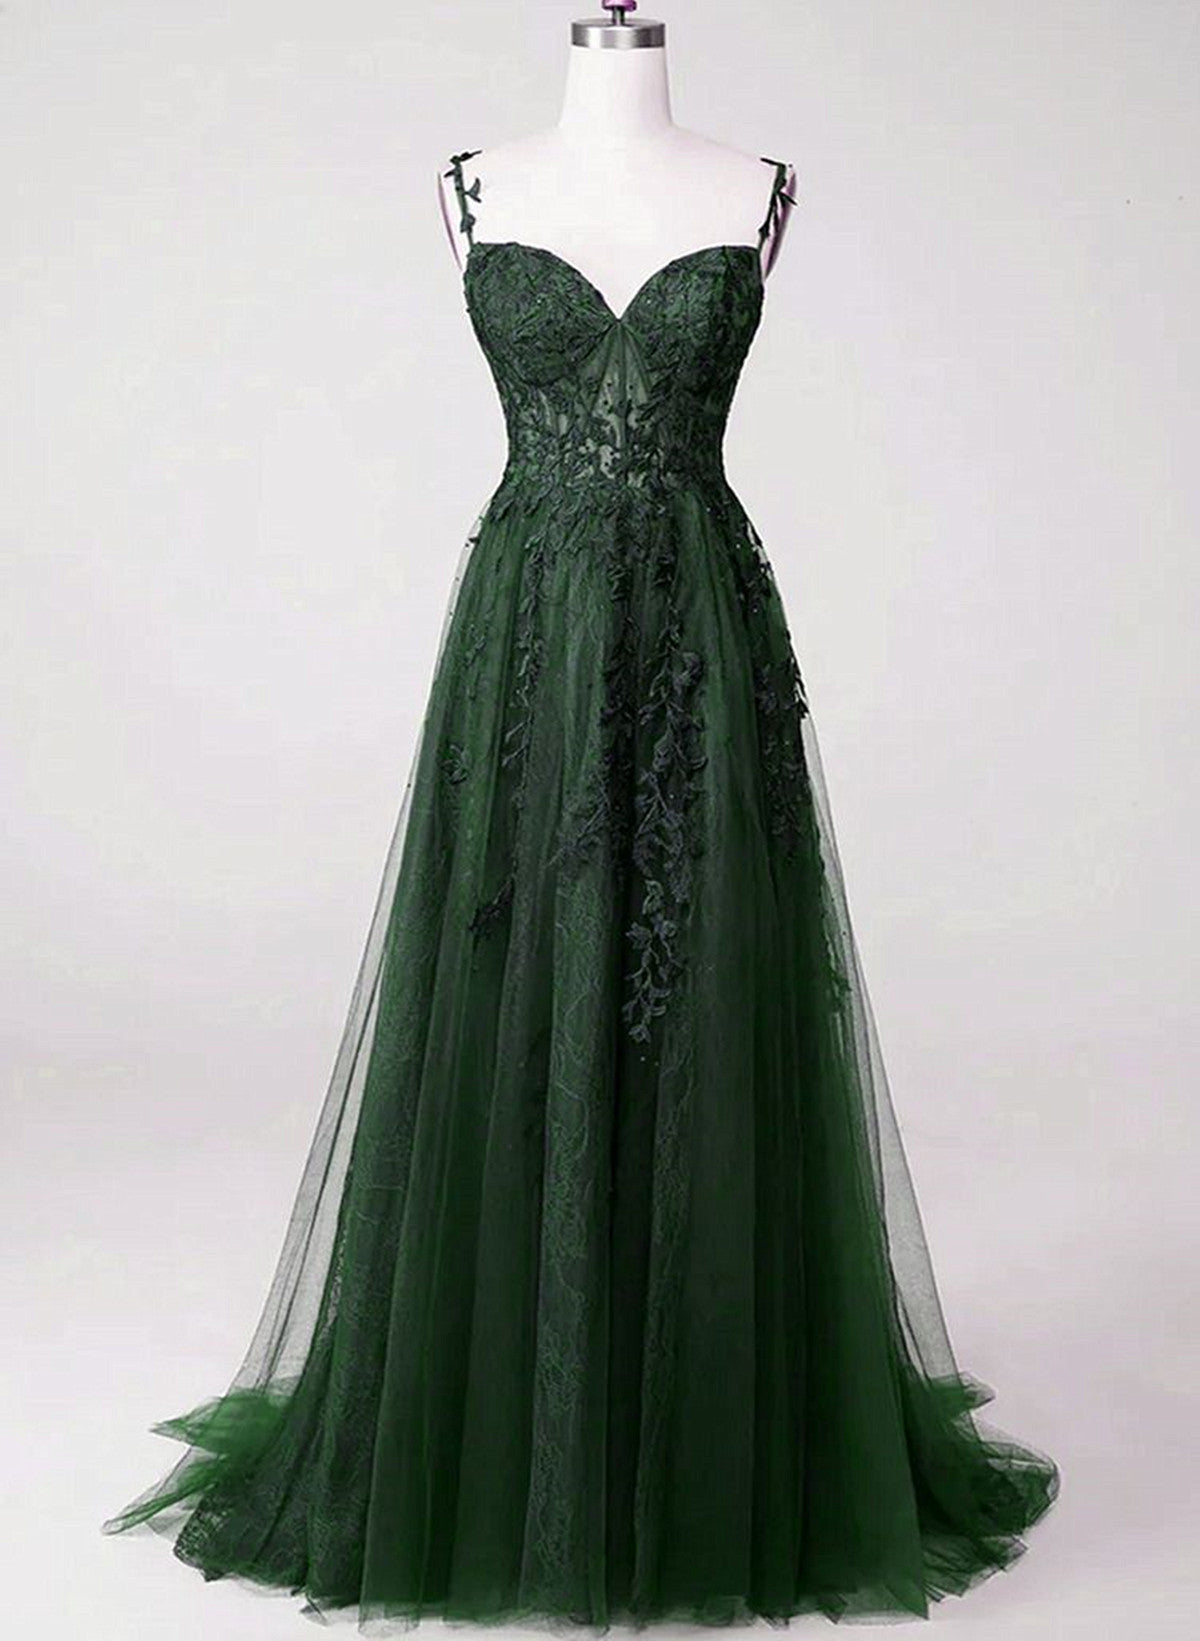 Bridesmaid Dress Vintage, Chic Green Straps Tulle with Lace Party Dress, A-line Sweetheart Floor Length Prom Dress